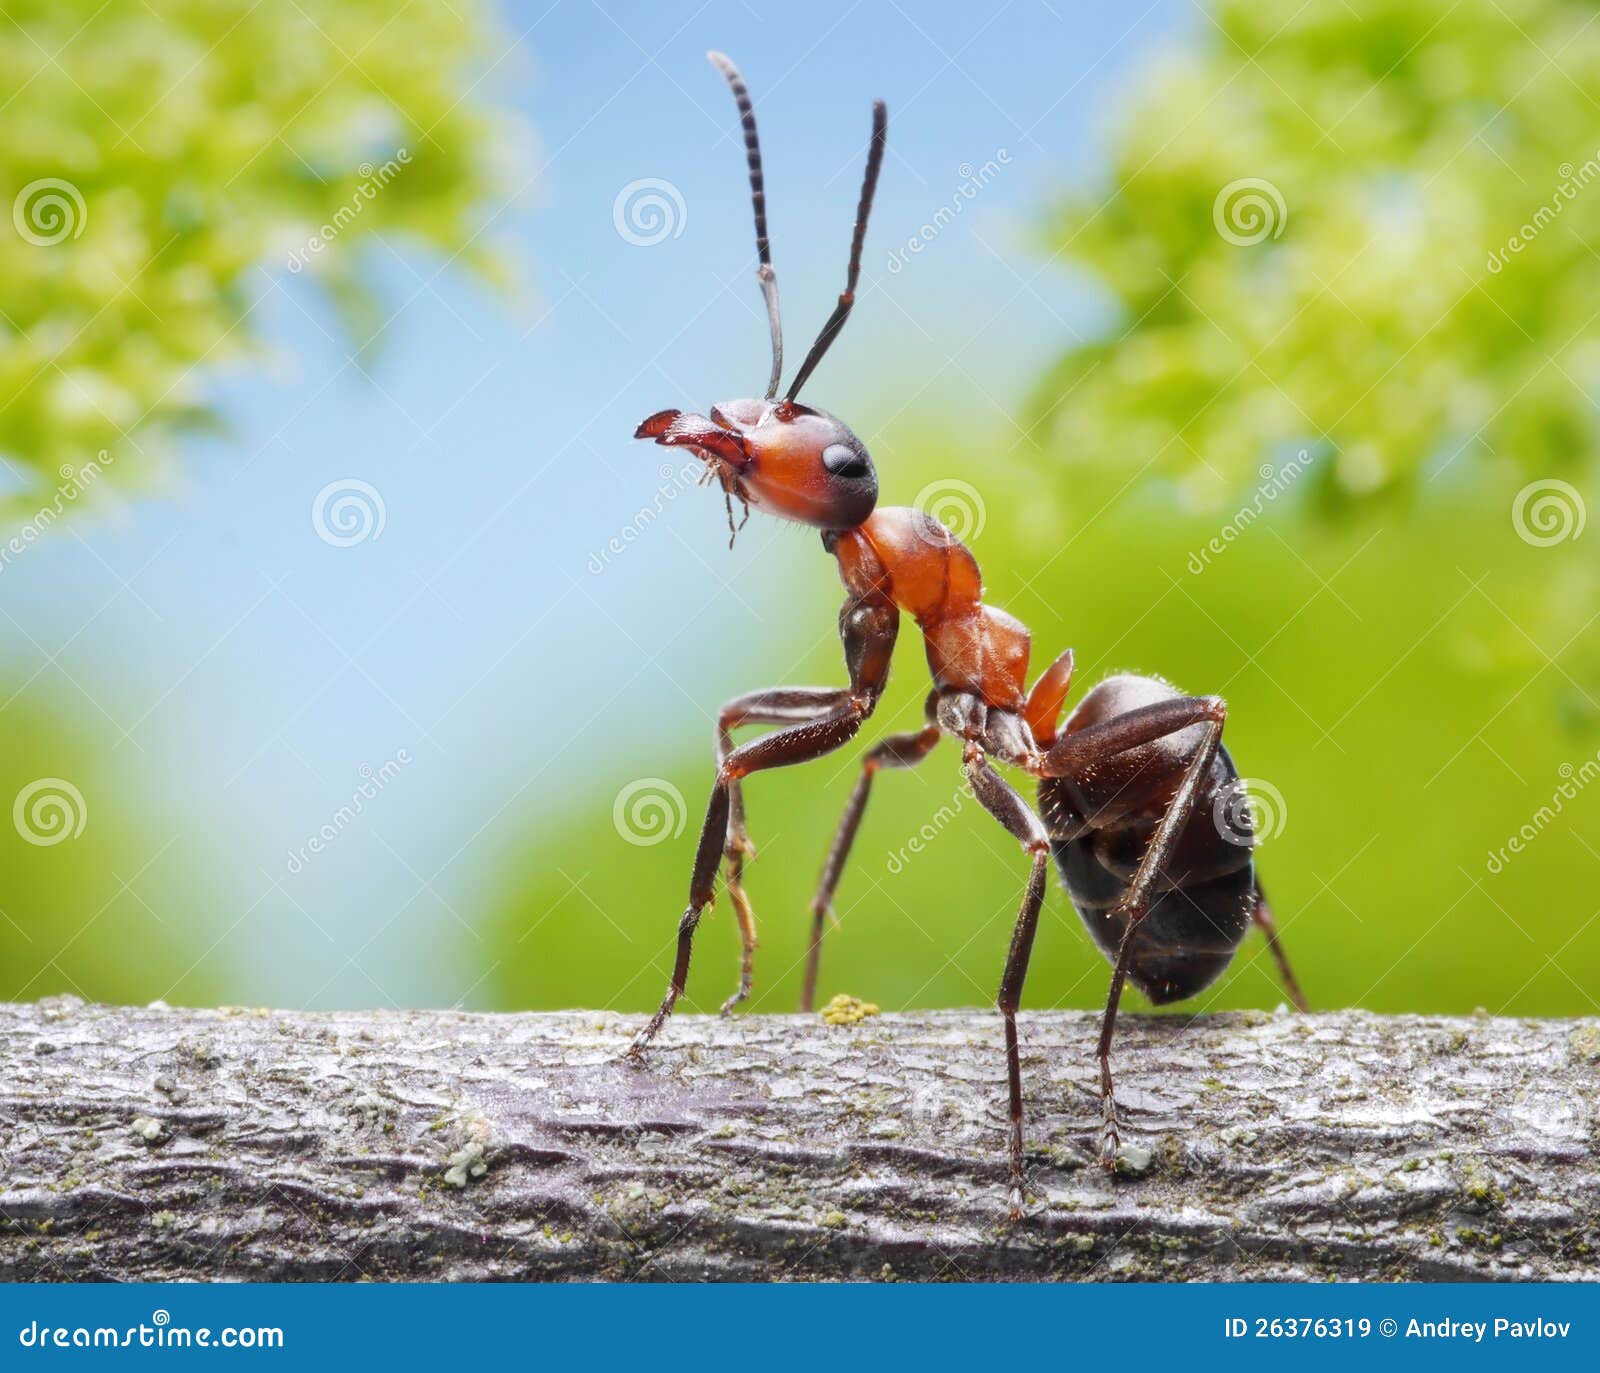 graceful ant on branch